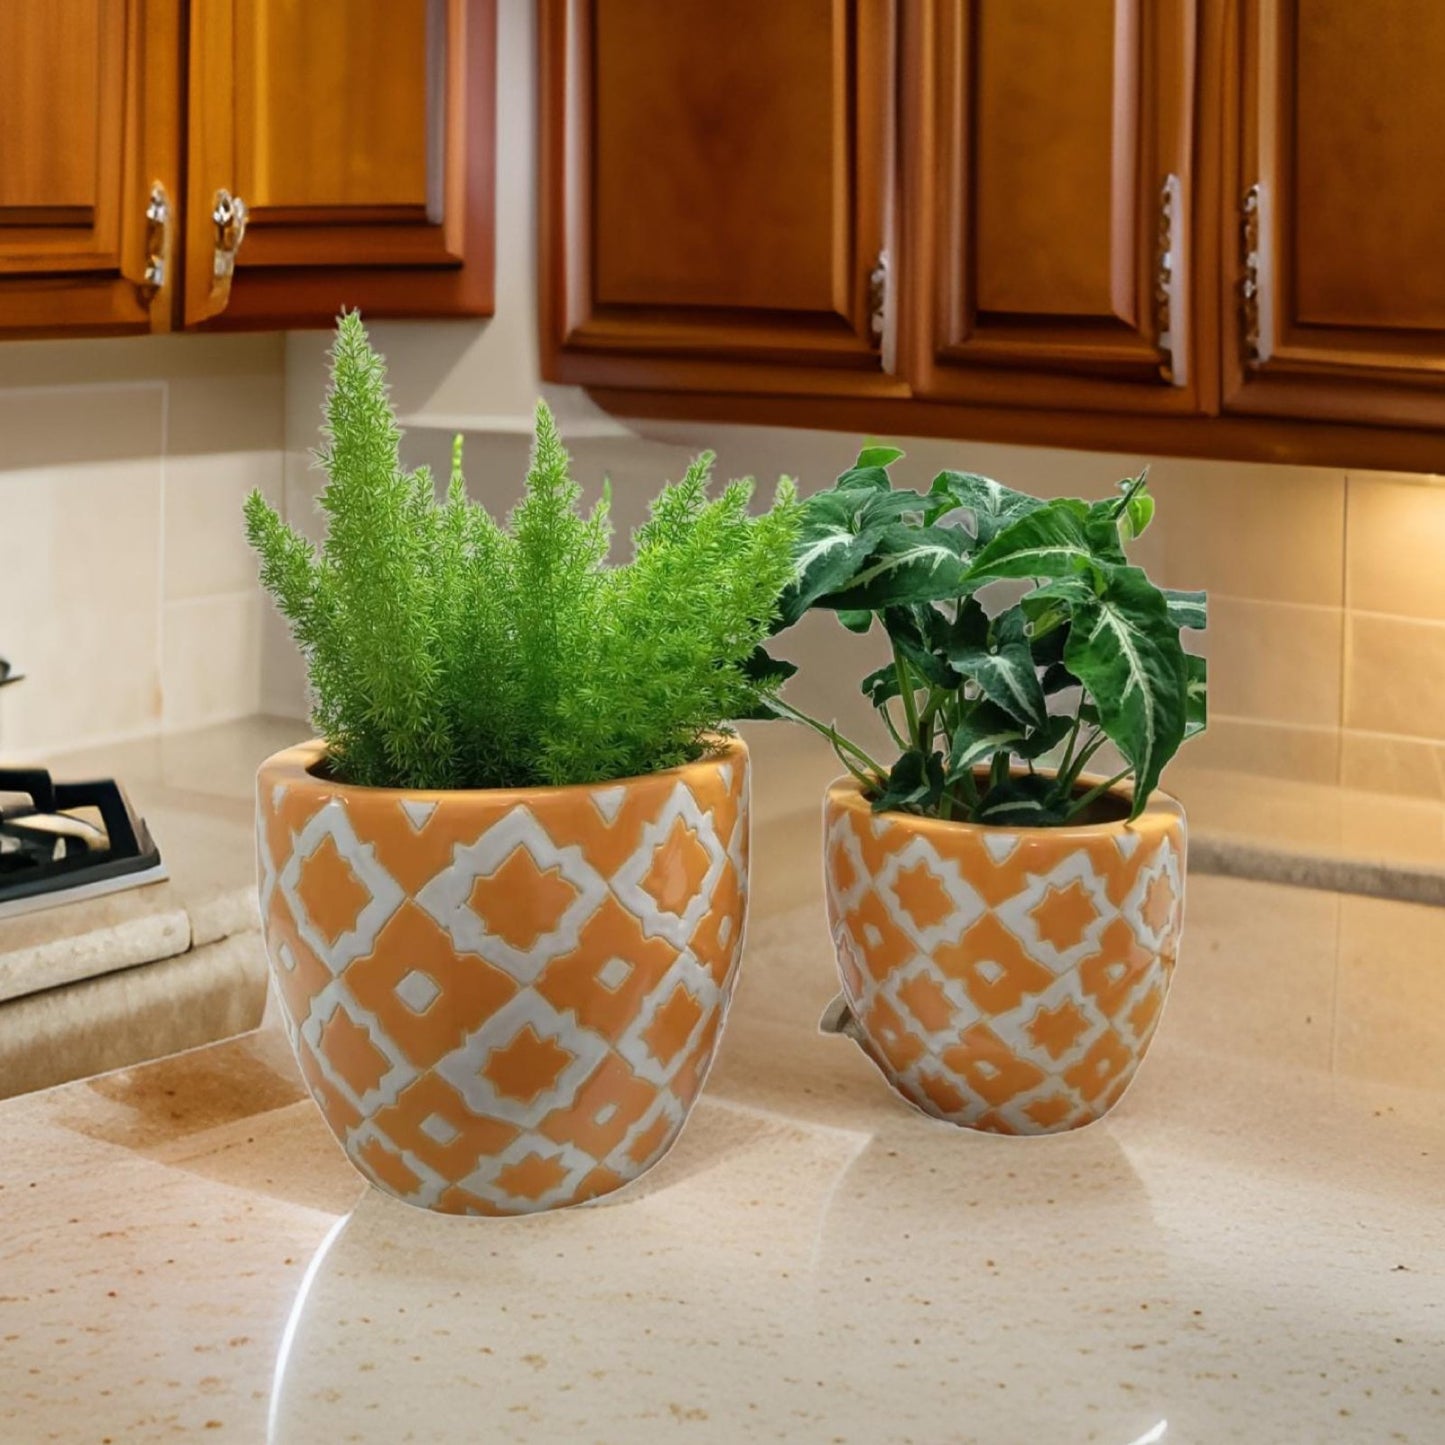 Ceramic pots in Delhi Mughal style-Decorative planters for indoor plants. - The Plant Shop